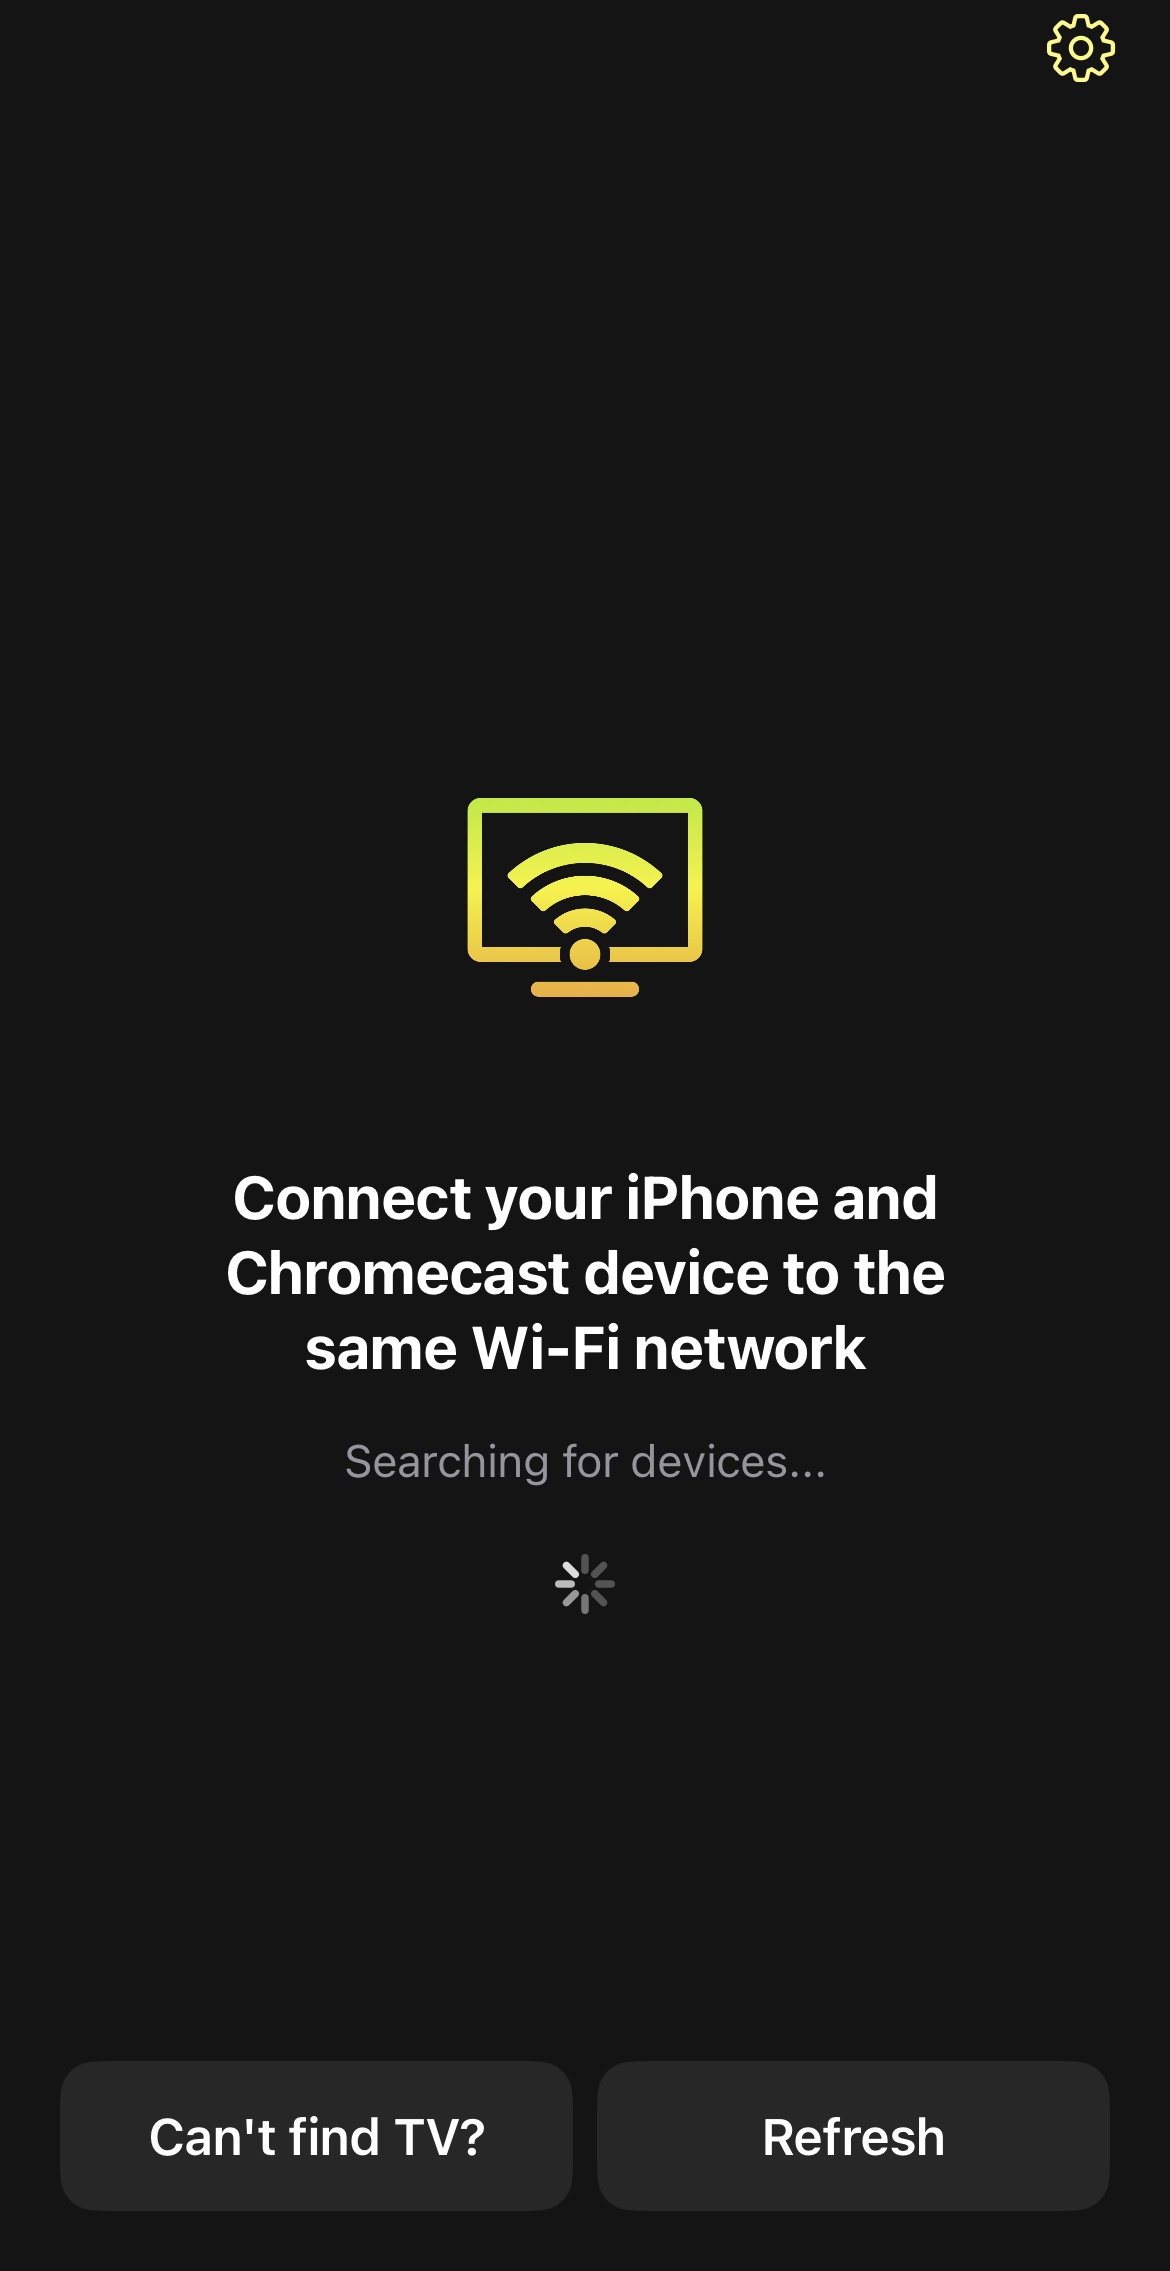 Let DoCast to find nearby Chromecast devices